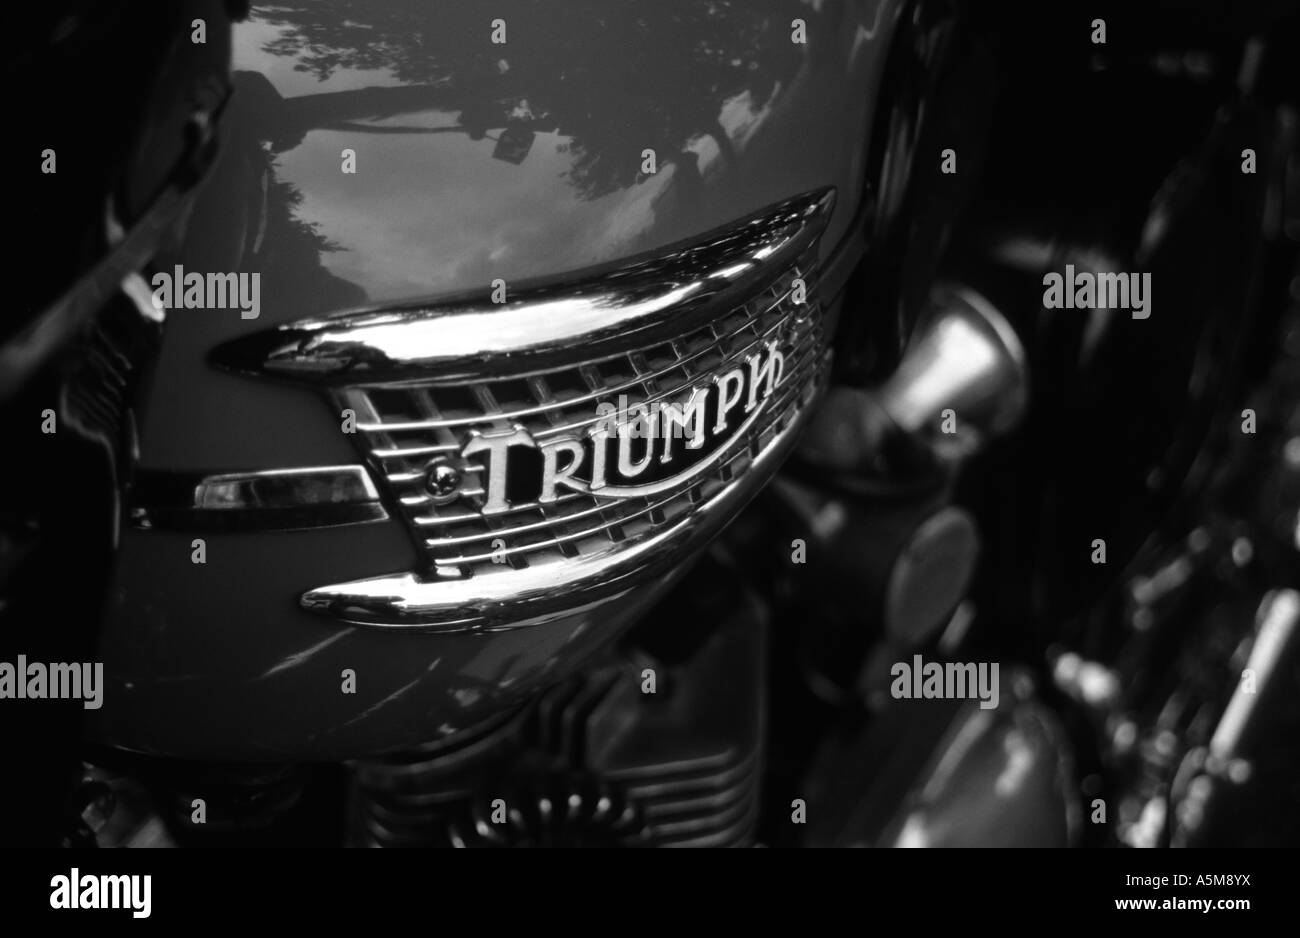 Historic triumph motorcycle Black and White Stock Photos & Images - Alamy